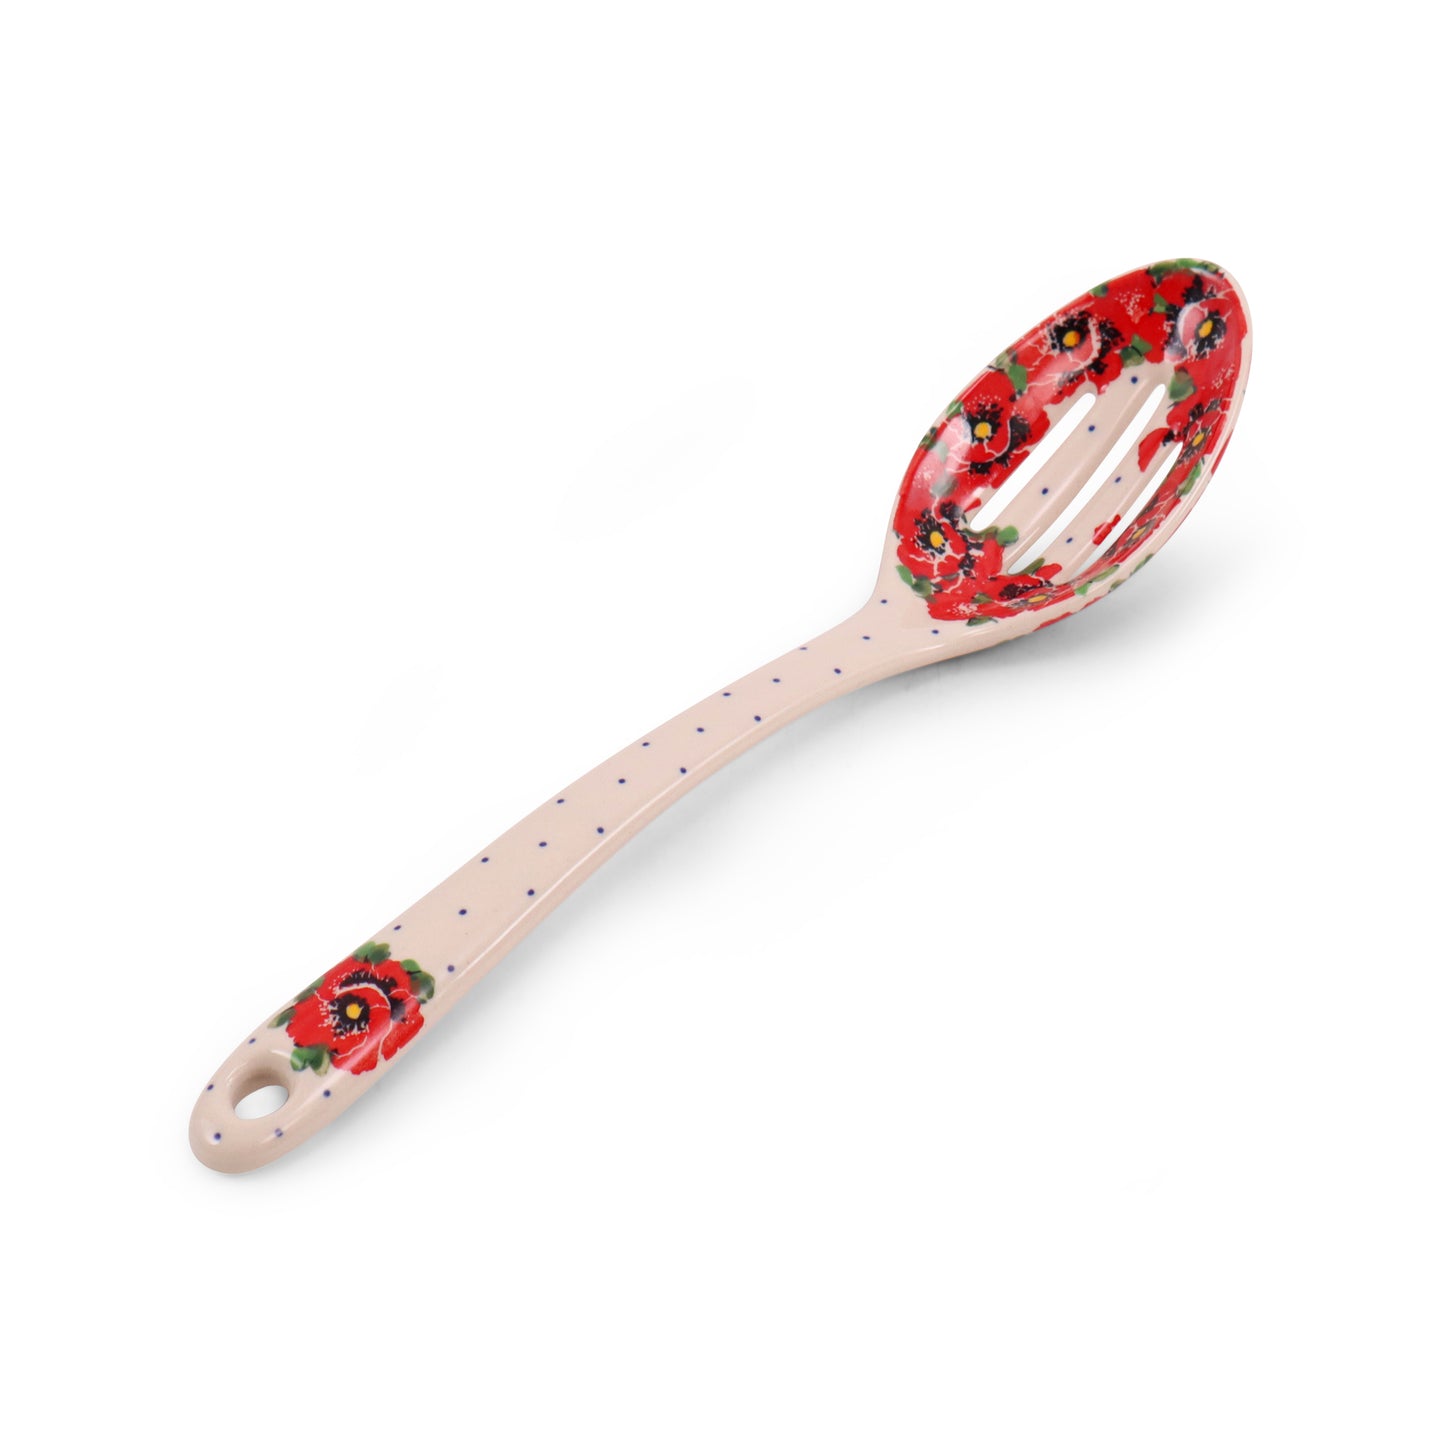 12" Slotted Spoon. Pattern: Surroundings Inspiration